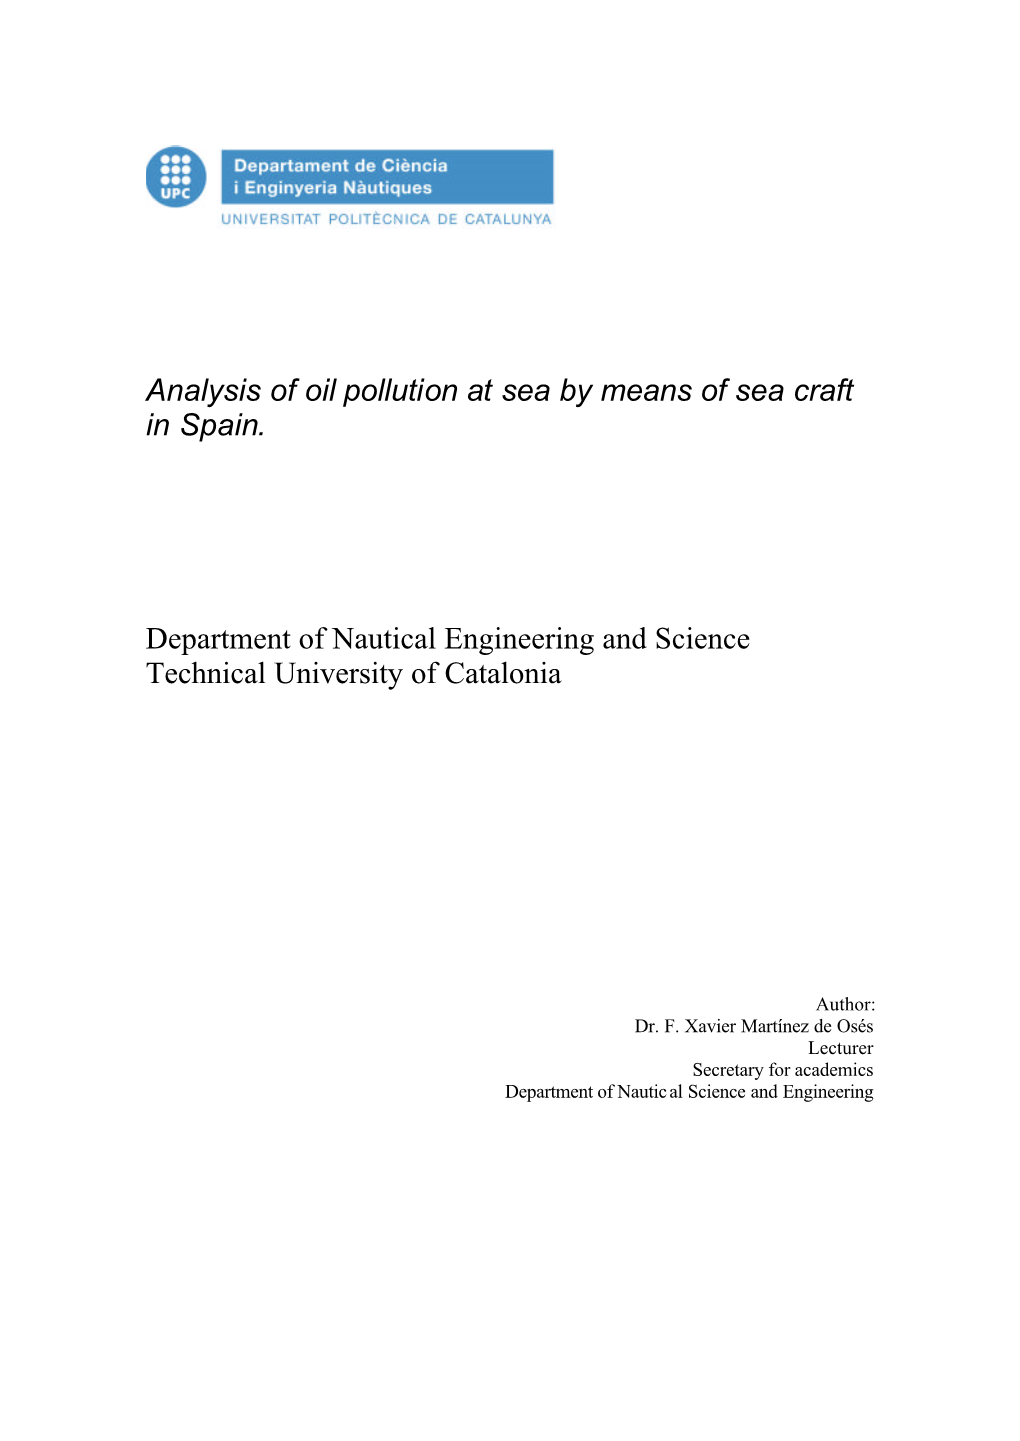 Analysis of Oil Pollution at Sea by Means of Sea Craft in Spain